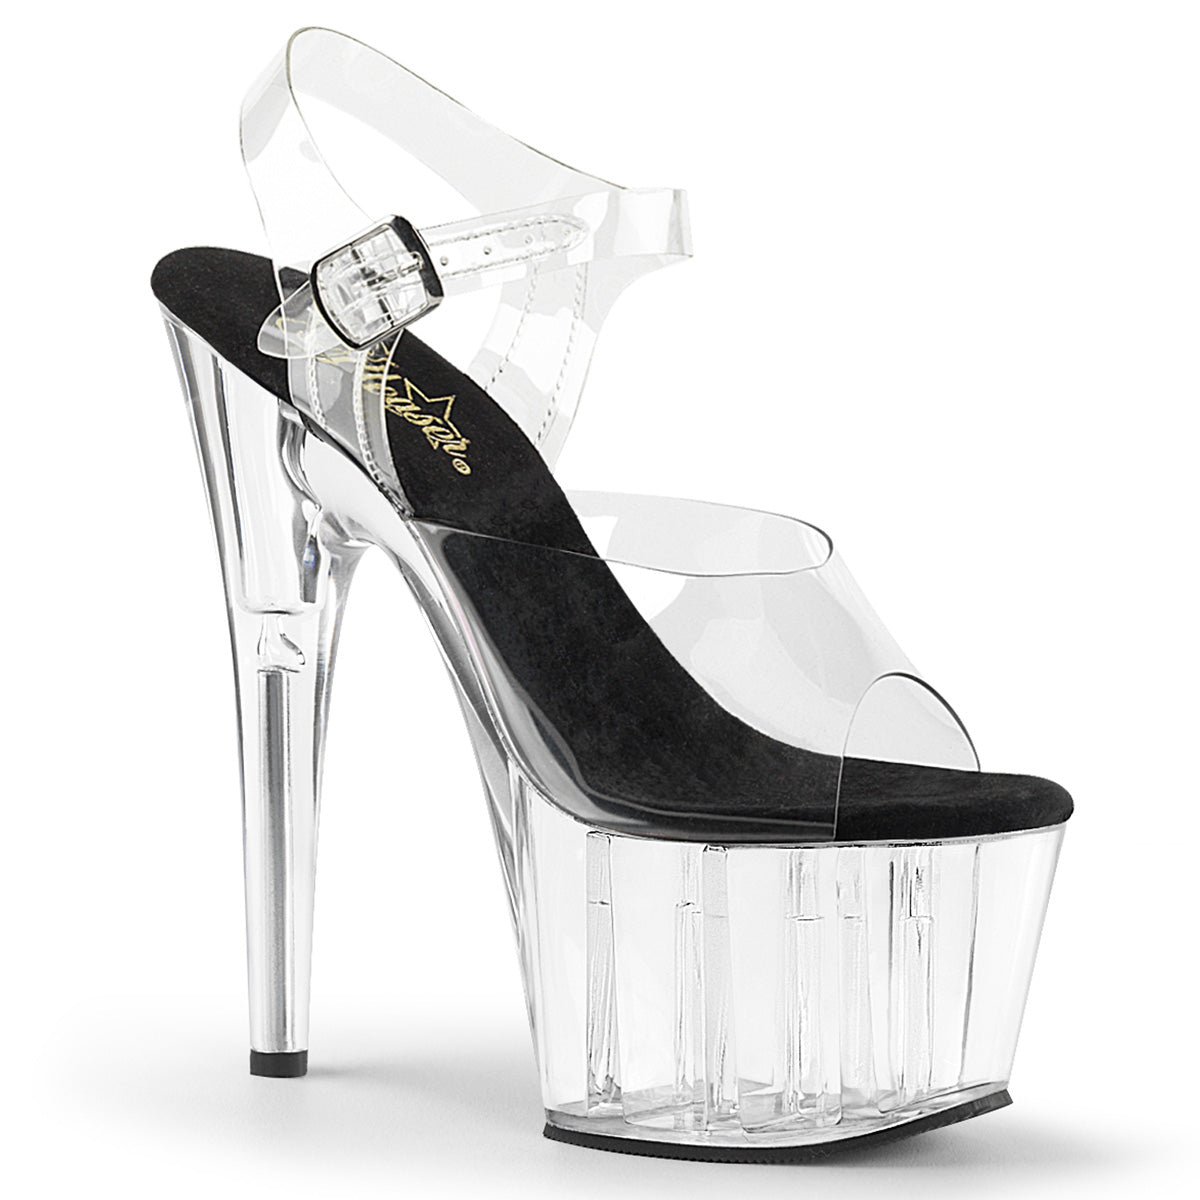 ADORE-708 Pleaser 7" Heel Clear and Black Pole Dancing Shoes